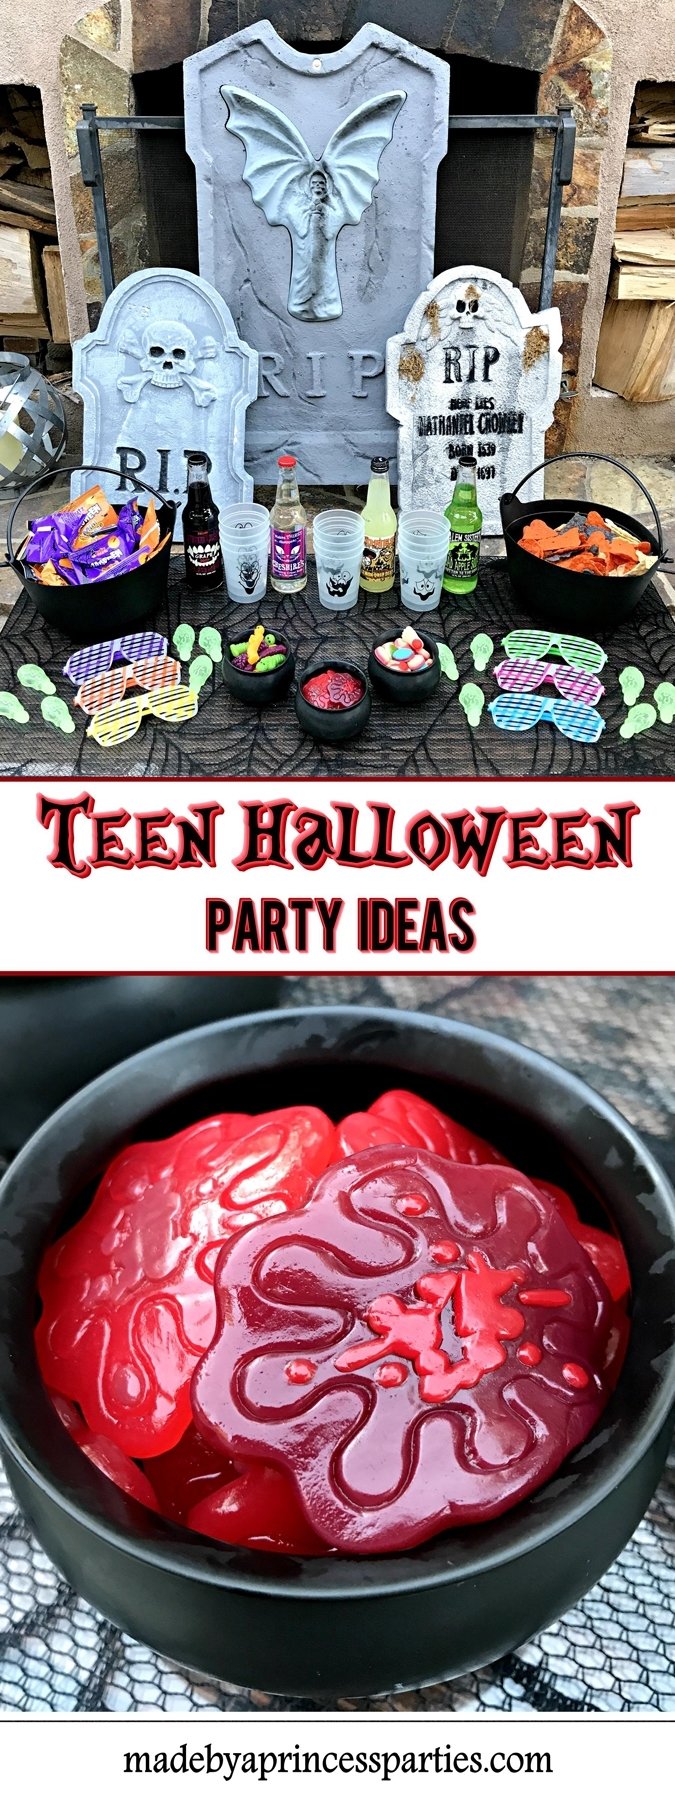 10 Most Recommended Halloween Party Ideas For Teenagers 2021